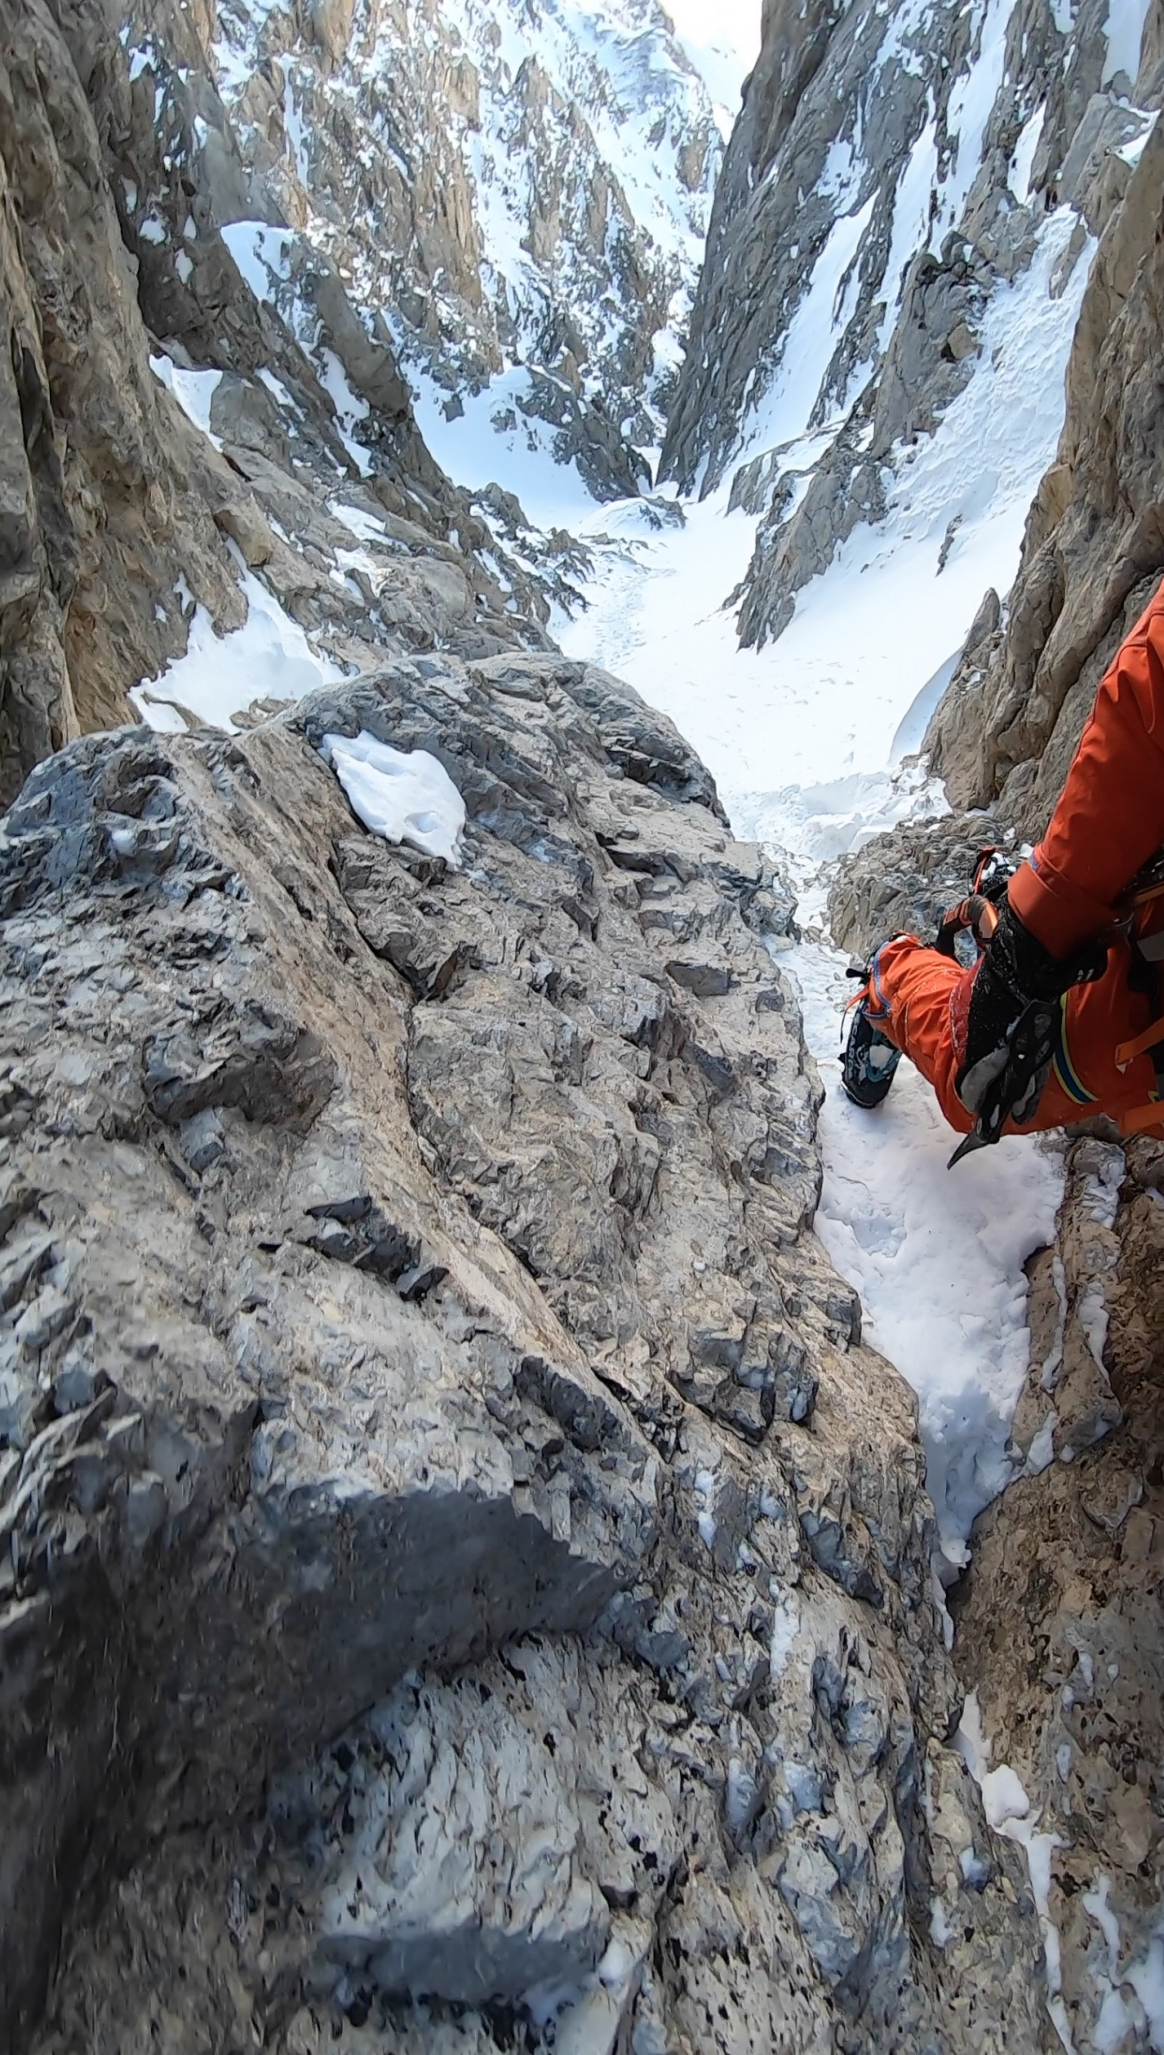 Paul Bonhomme climbing while working on his 10x Project of completing 10 first descents in the Alps.